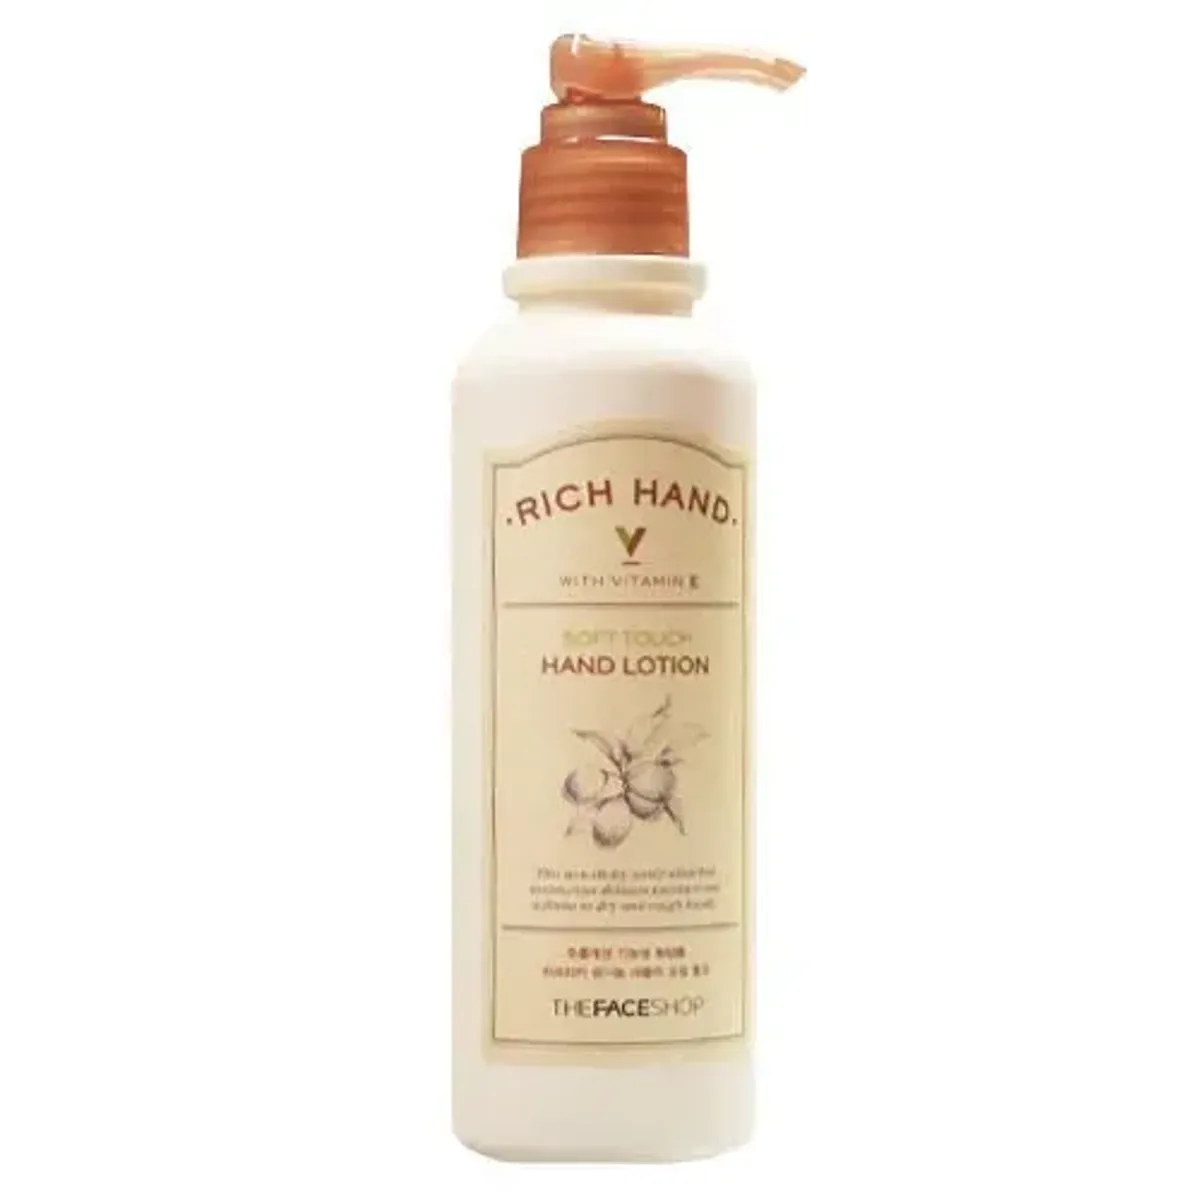 kem-duong-tay-cung-cap-am-rich-hand-v-soft-touch-hand-lotion-1